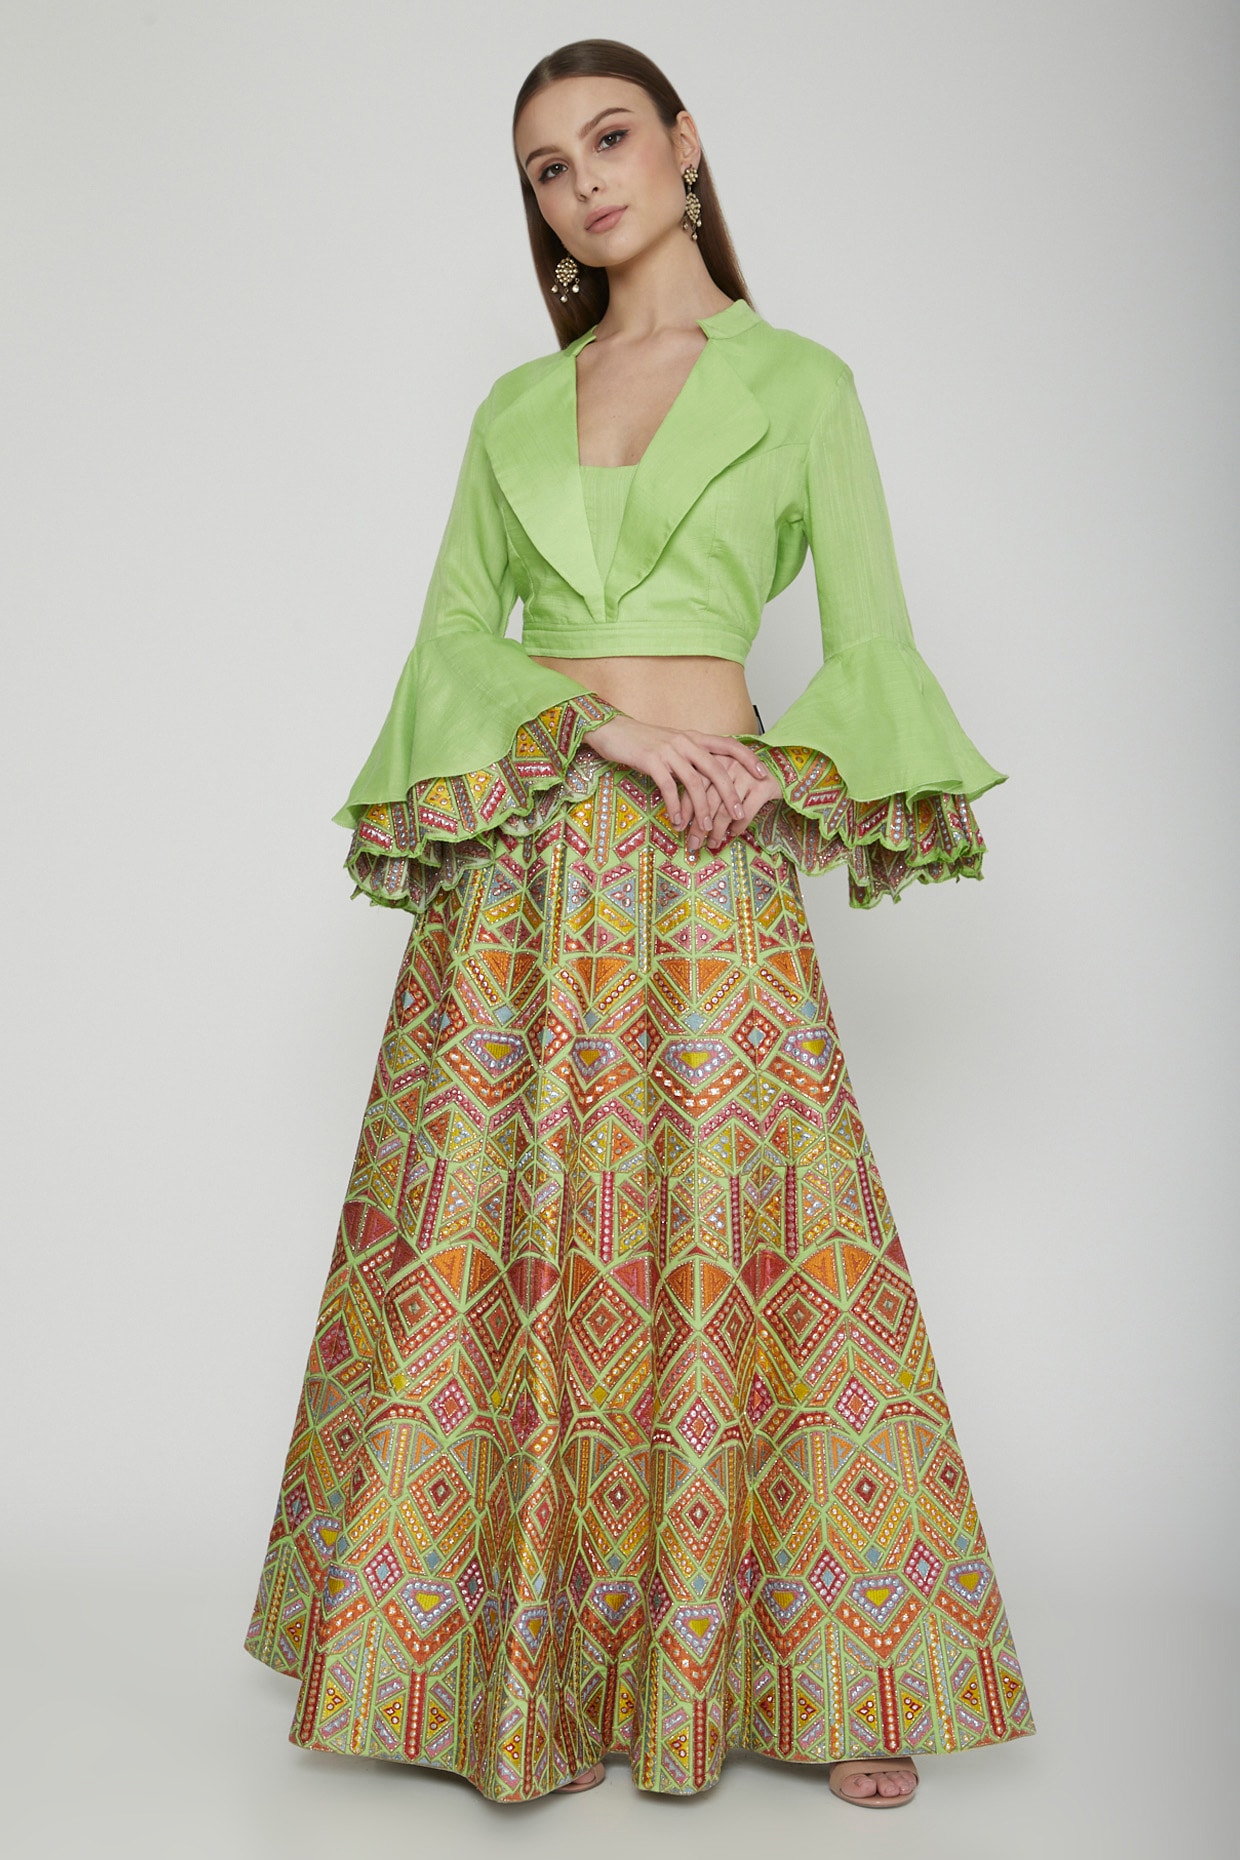 latest long skirt and top designs